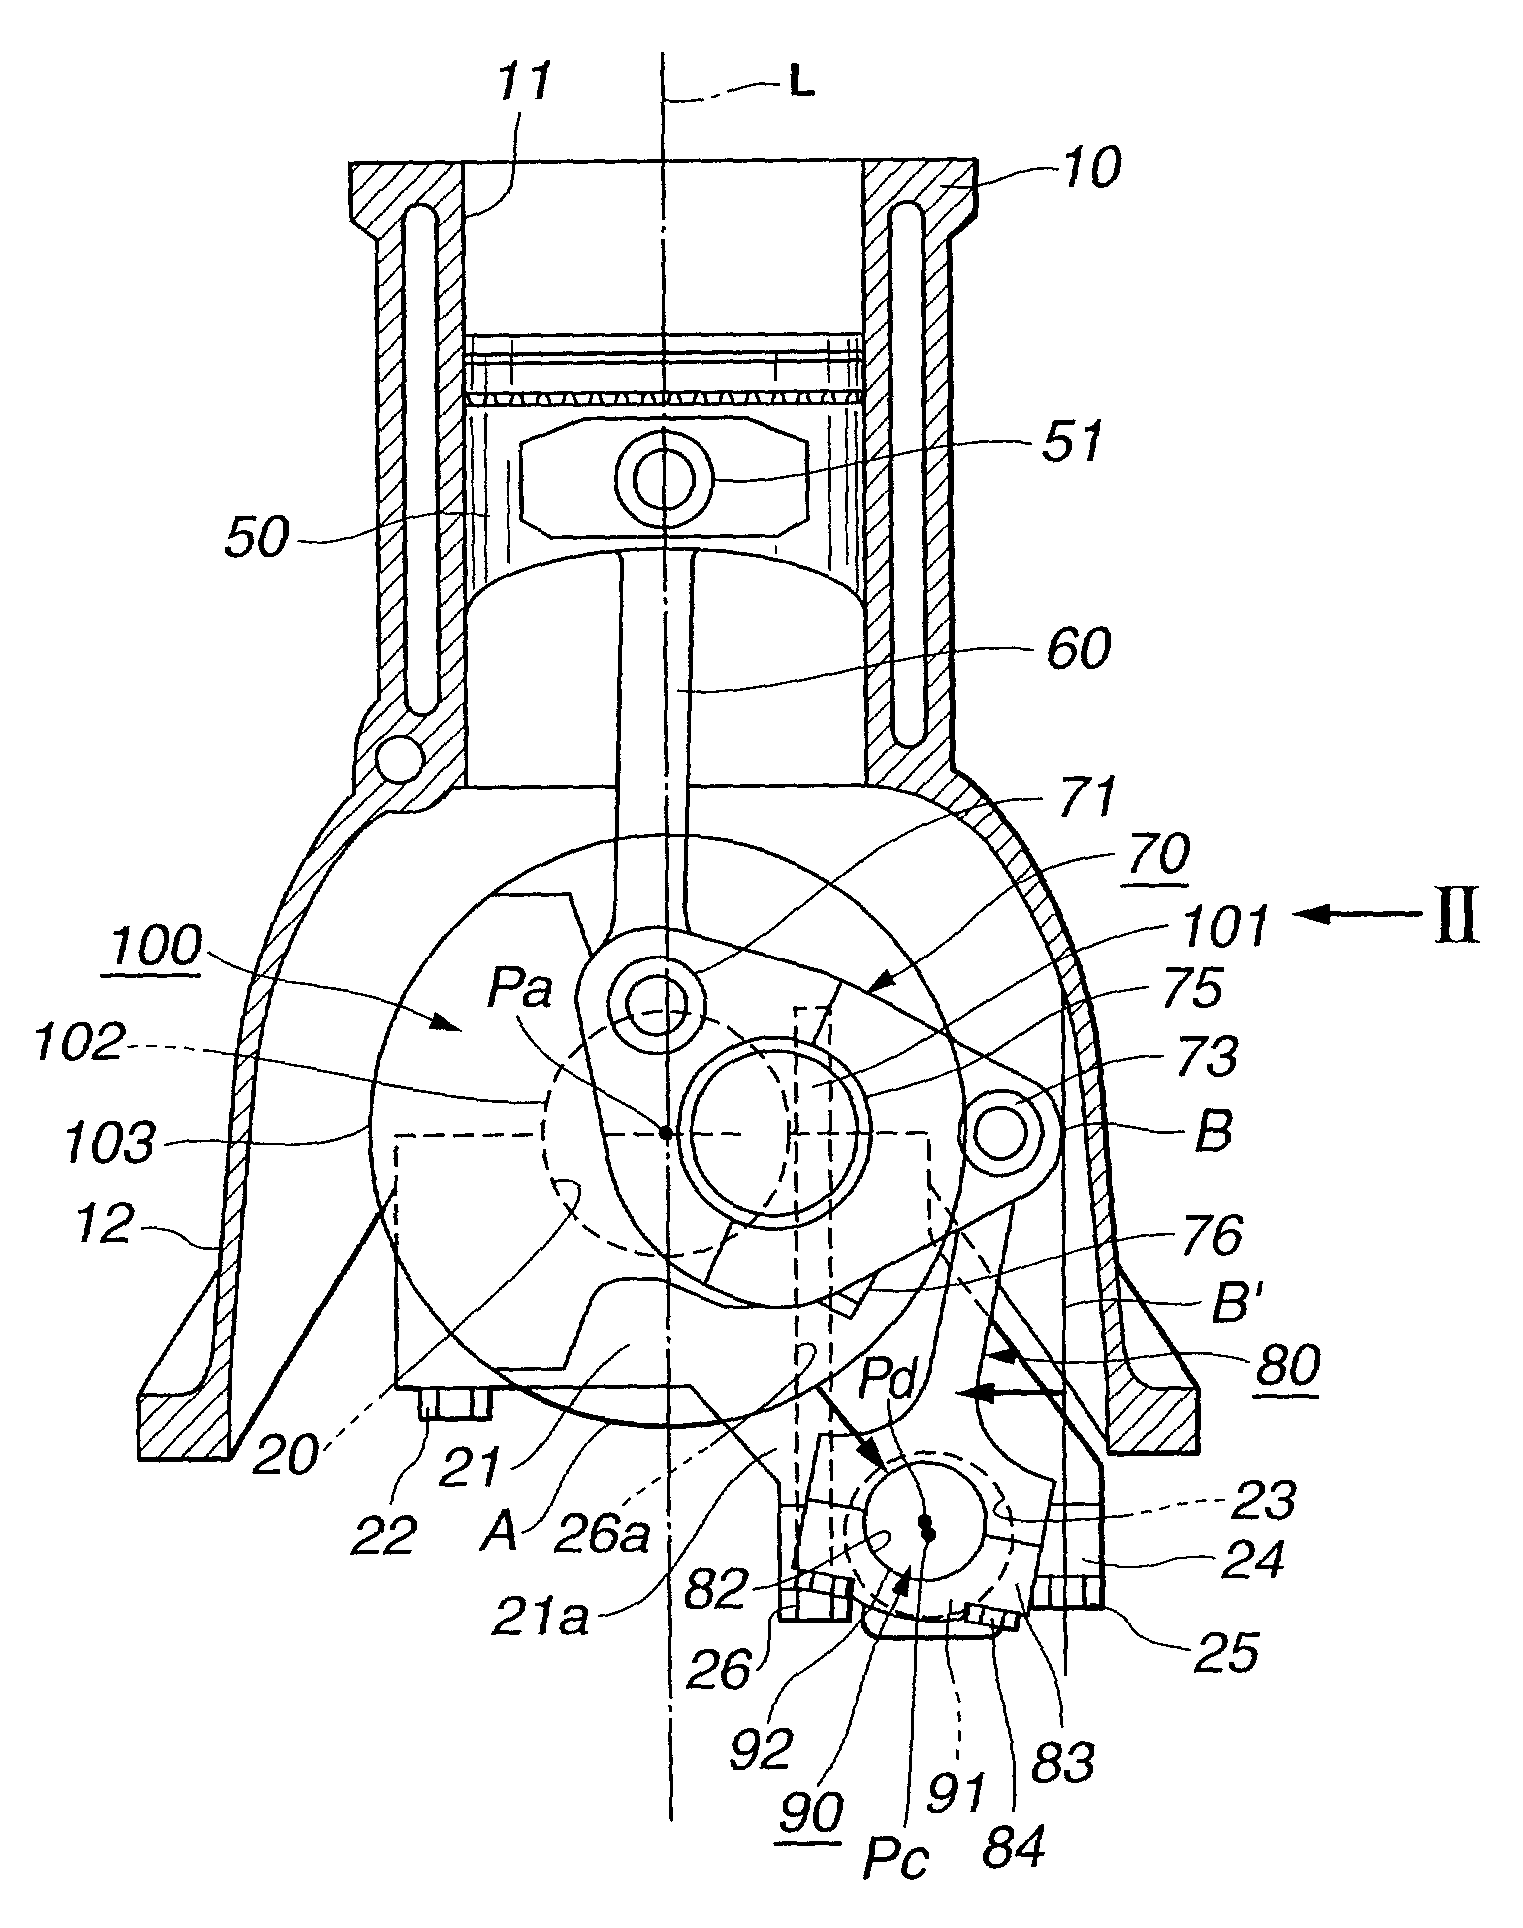 Internal combustion engine with variable compression ratio mechanism